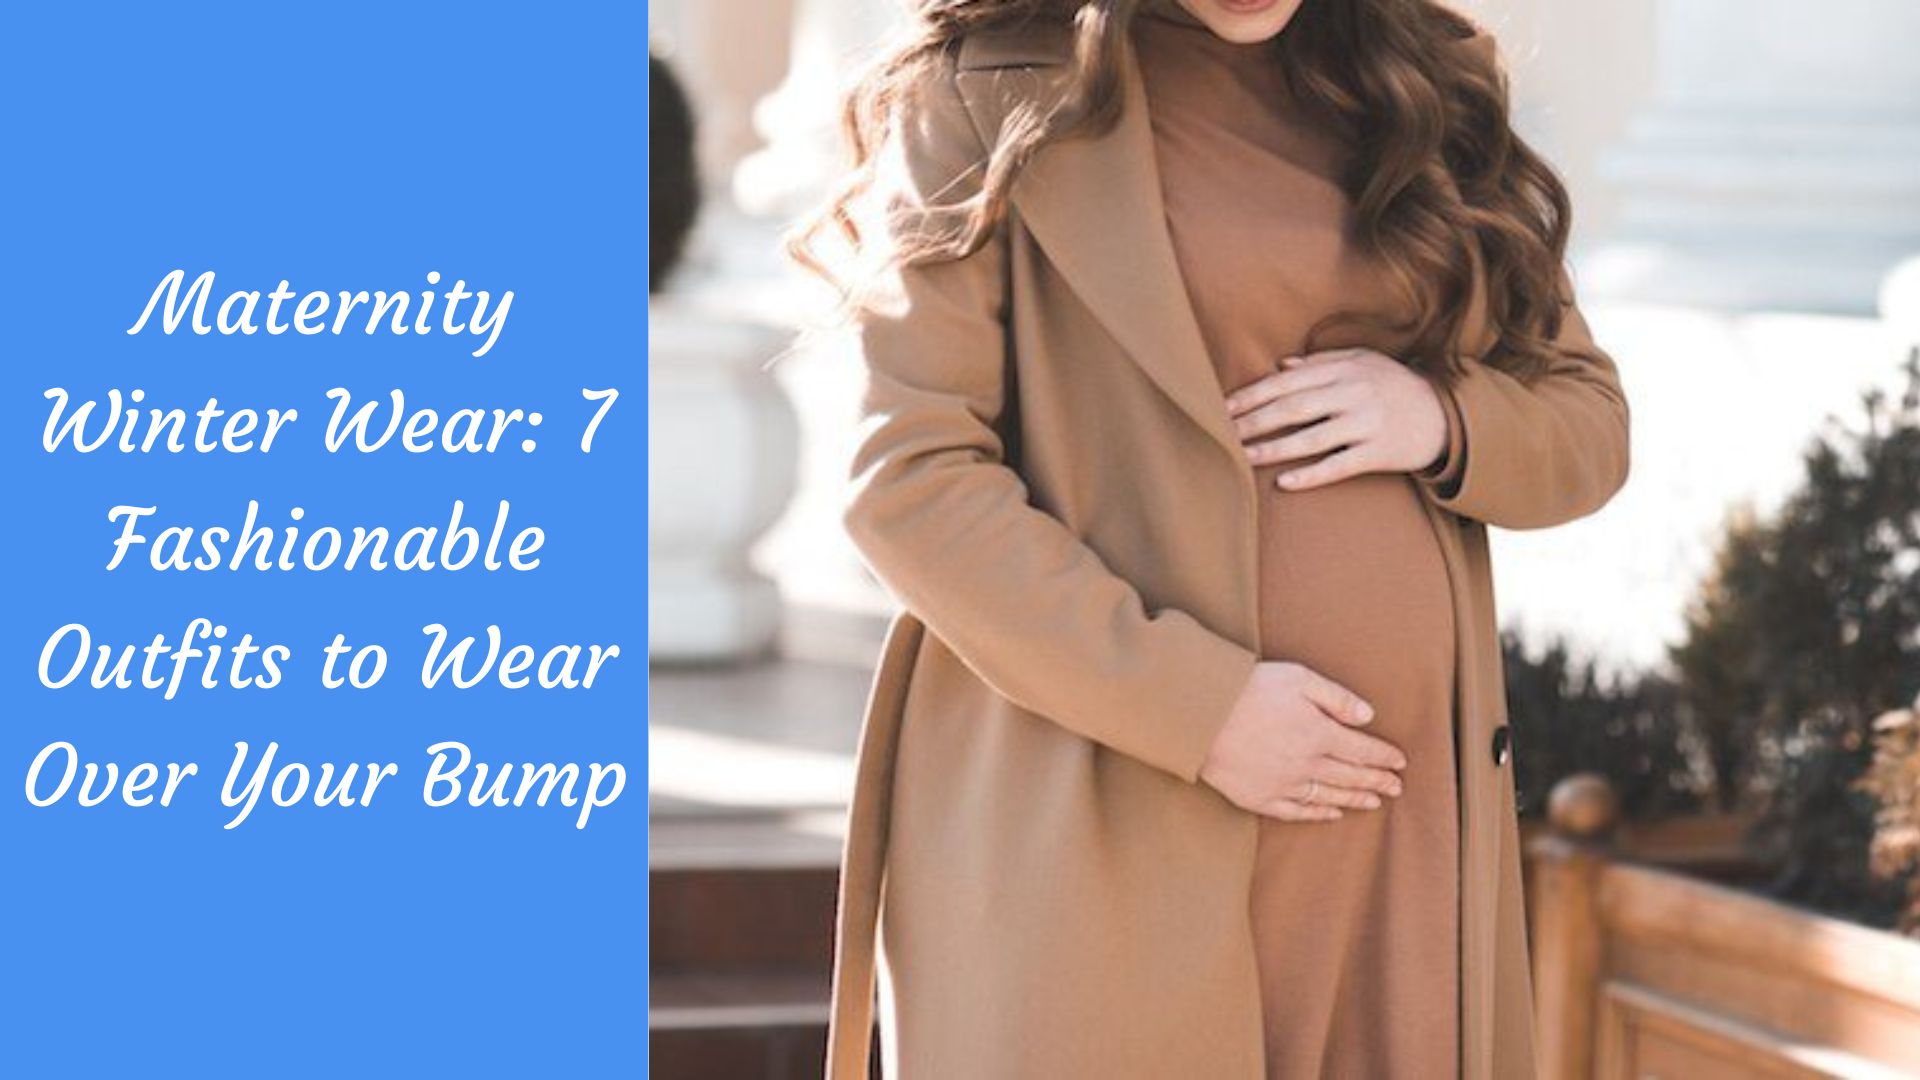 Maternity Winter Wear: 7 Fashionable Outfits to Wear Over Your Bump